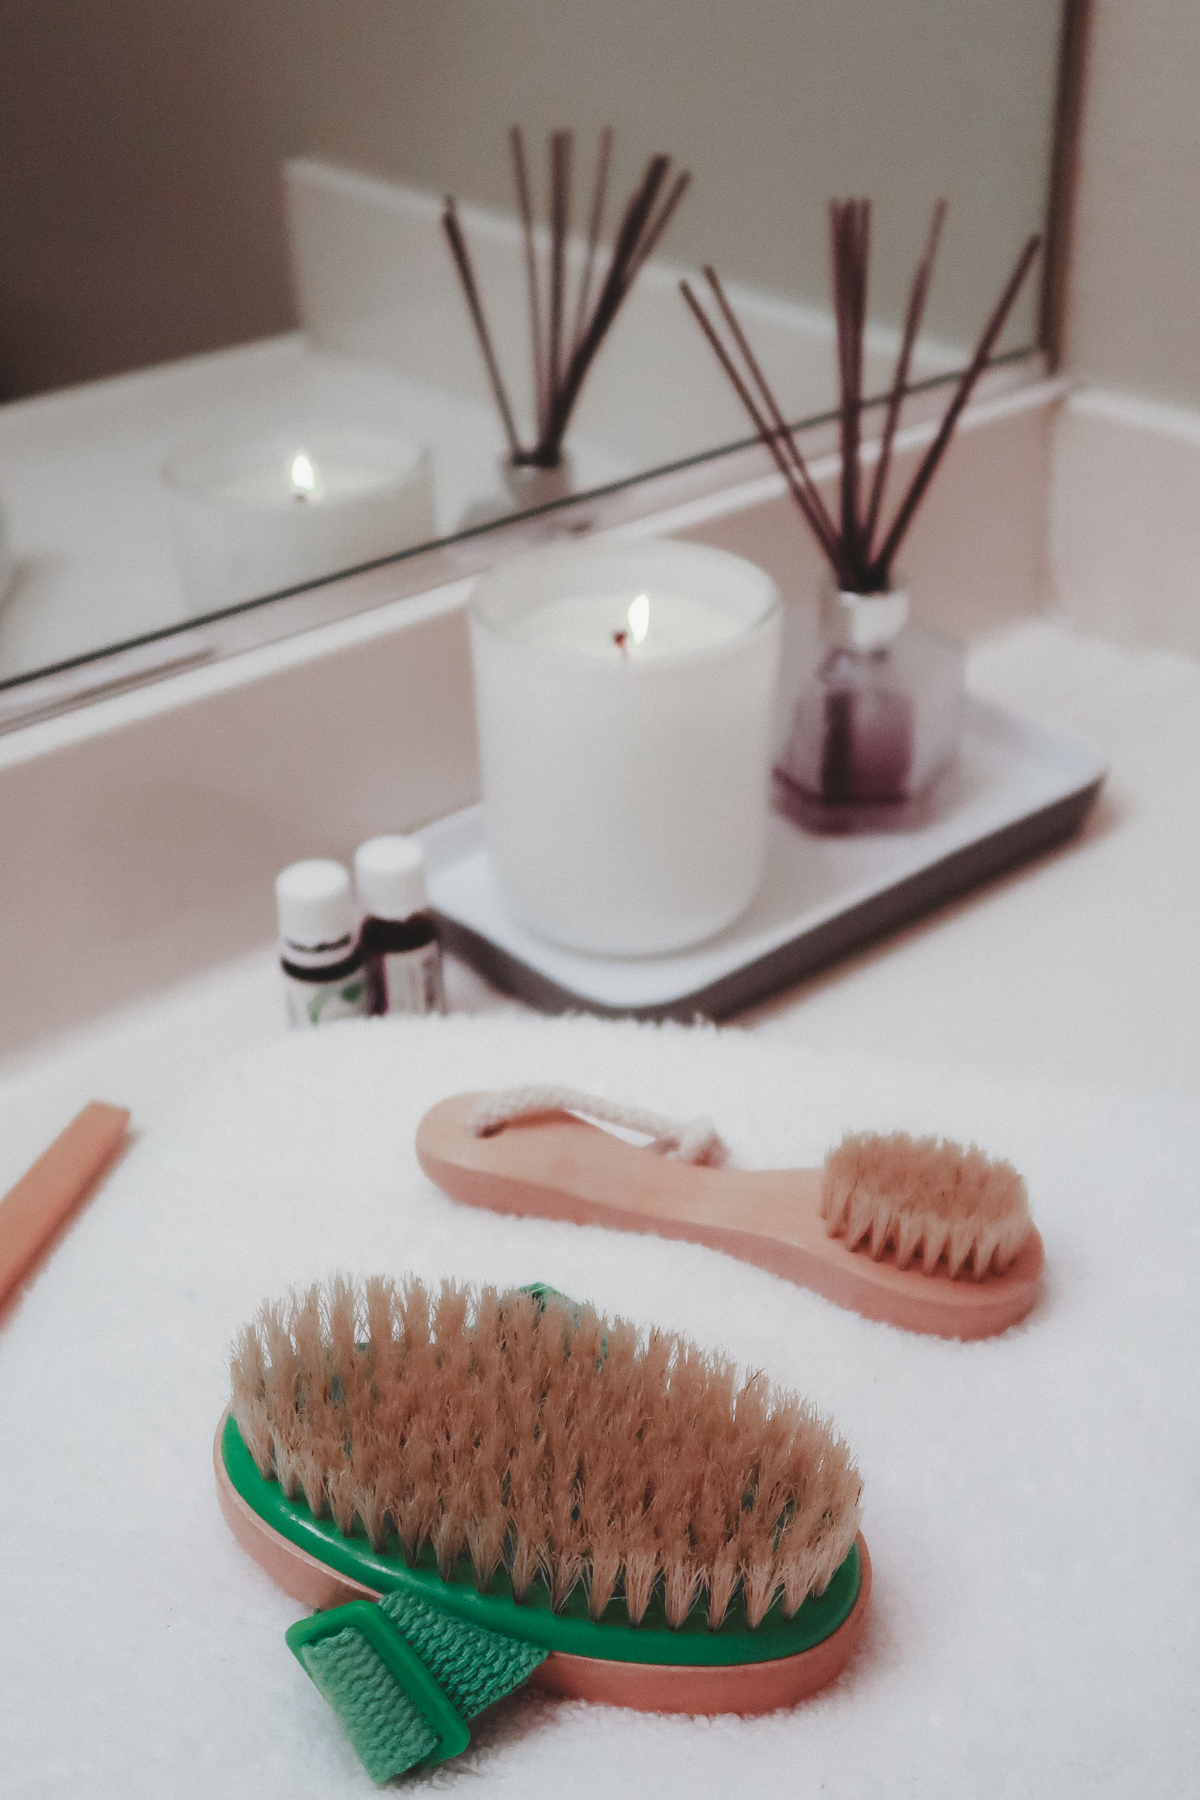 How to Clean a Dry Body Brush